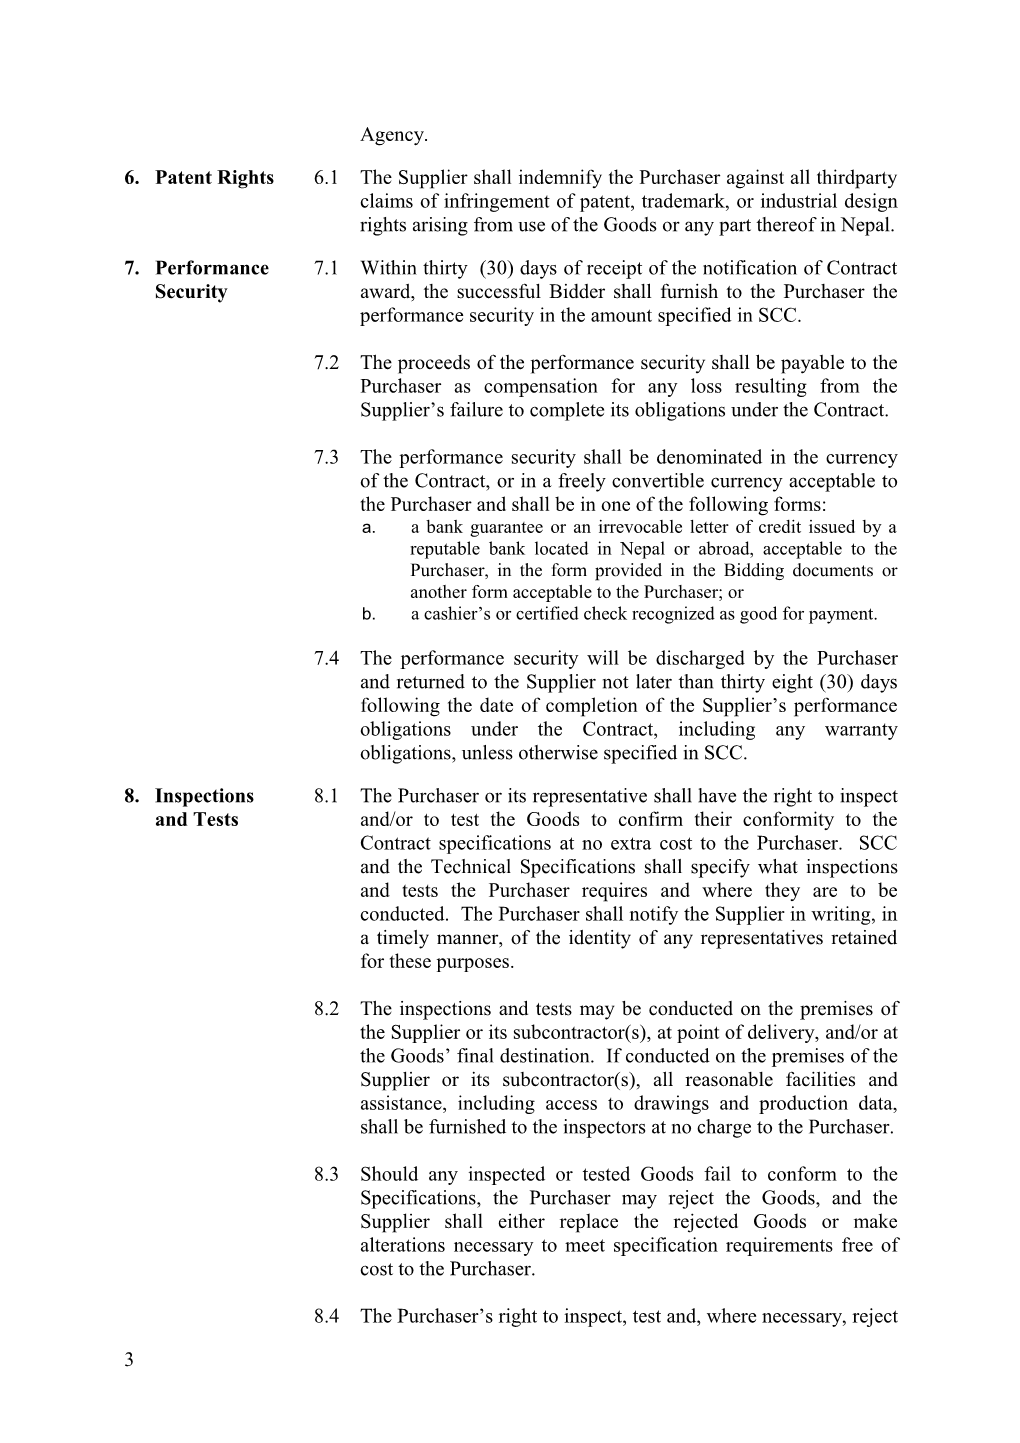 Section IV. General Conditions of Contract